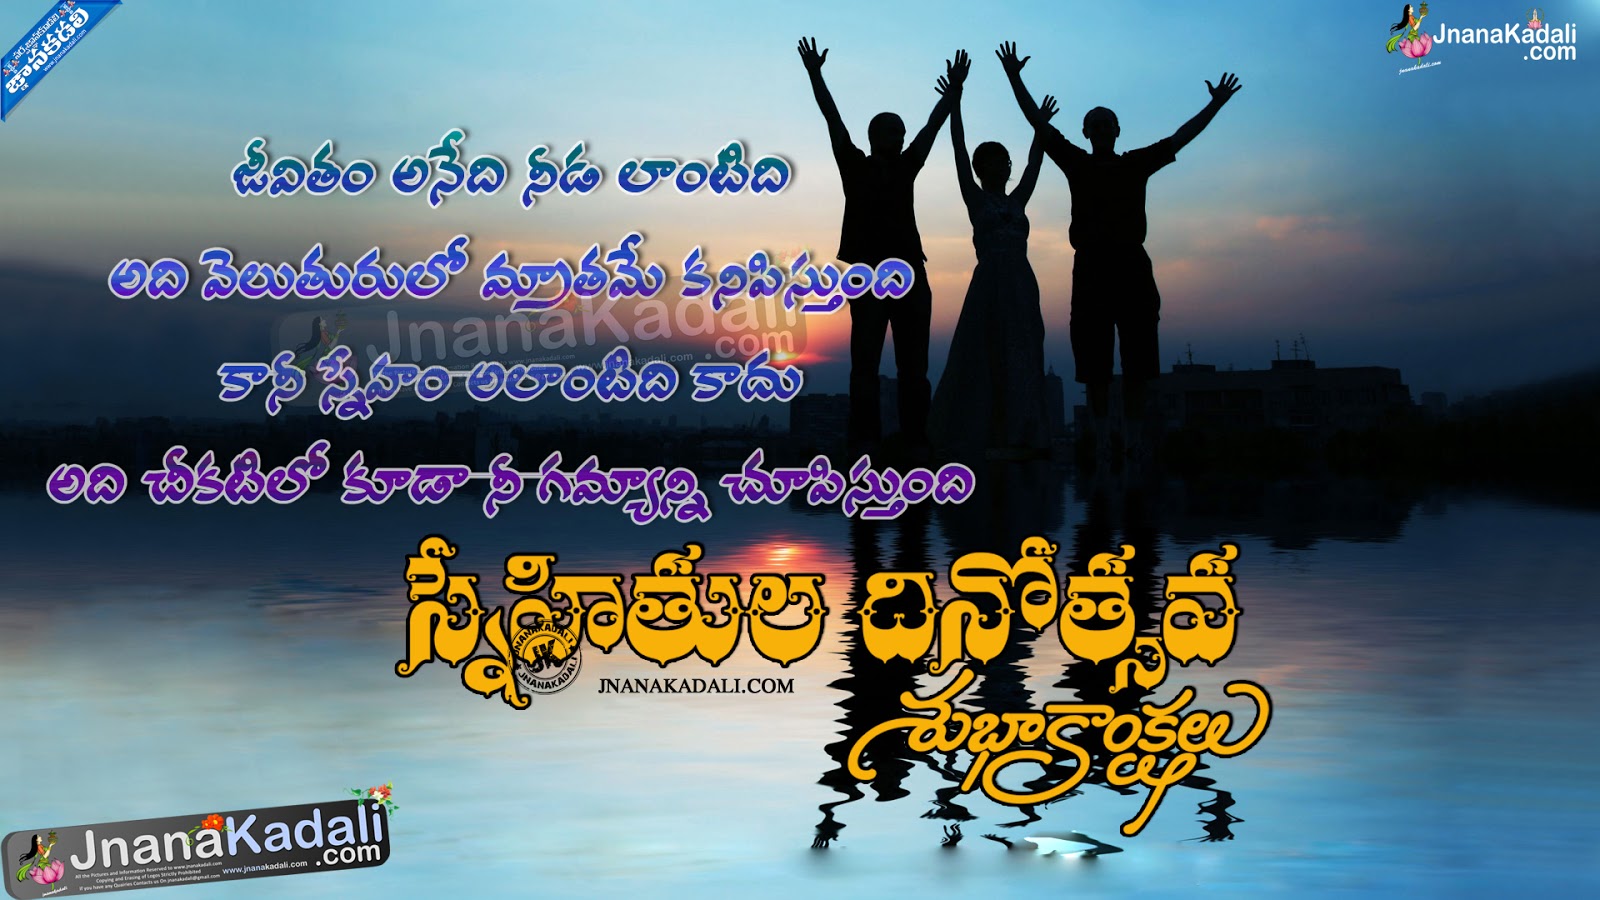 Happy Friendship Day Wishes Quotes Greetings in Telugu Language ...